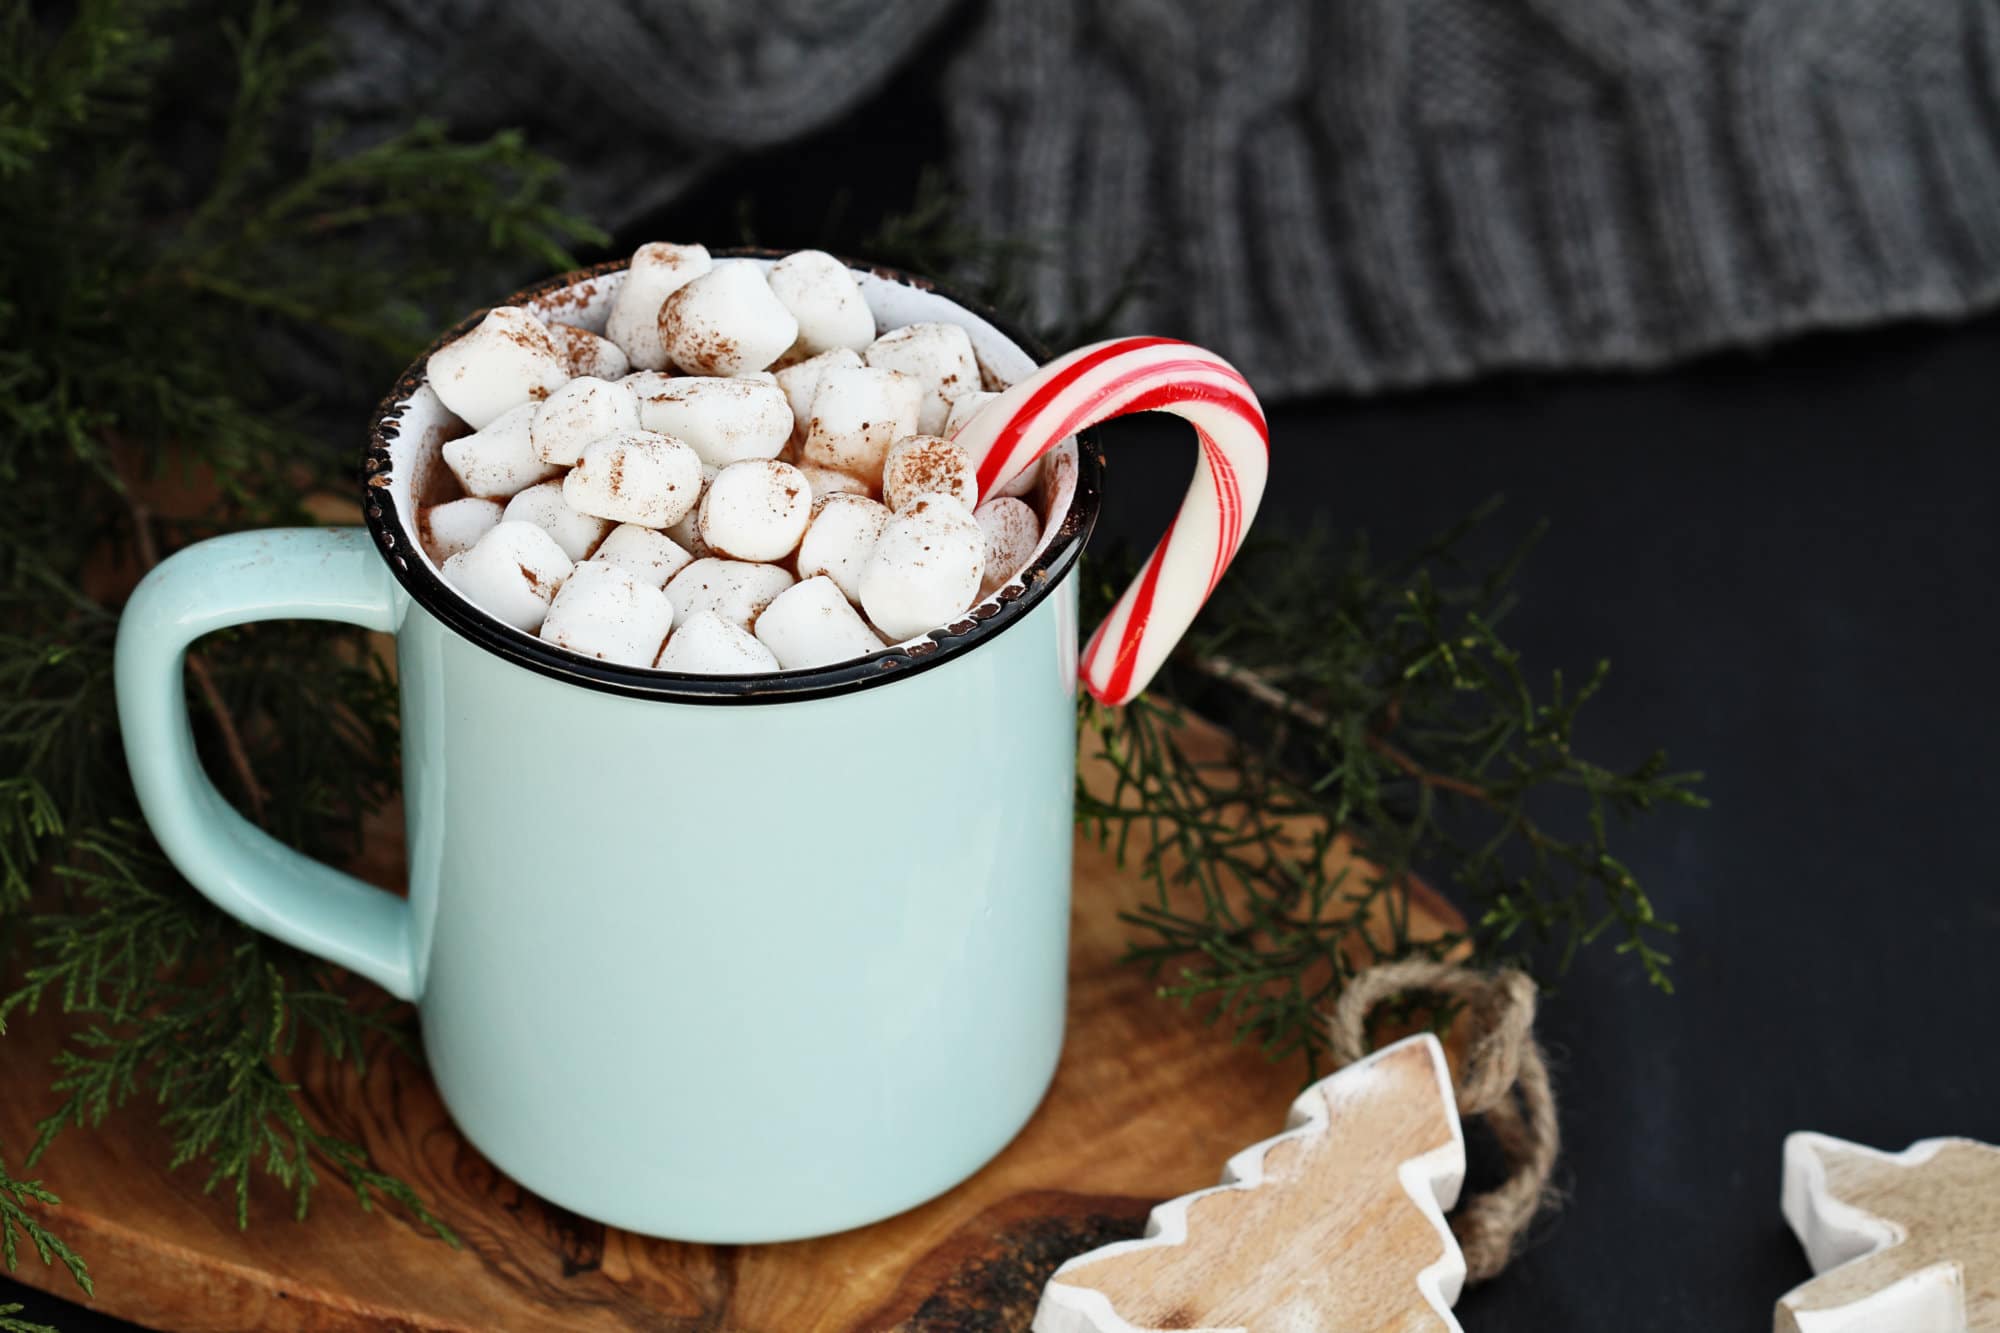 Enamel cup of hot cocoa drink with marshmallows and candy cane against a rustic background with beautiful wood Christmas tree ornaments and a grey scarf. Perfect winter time treat.